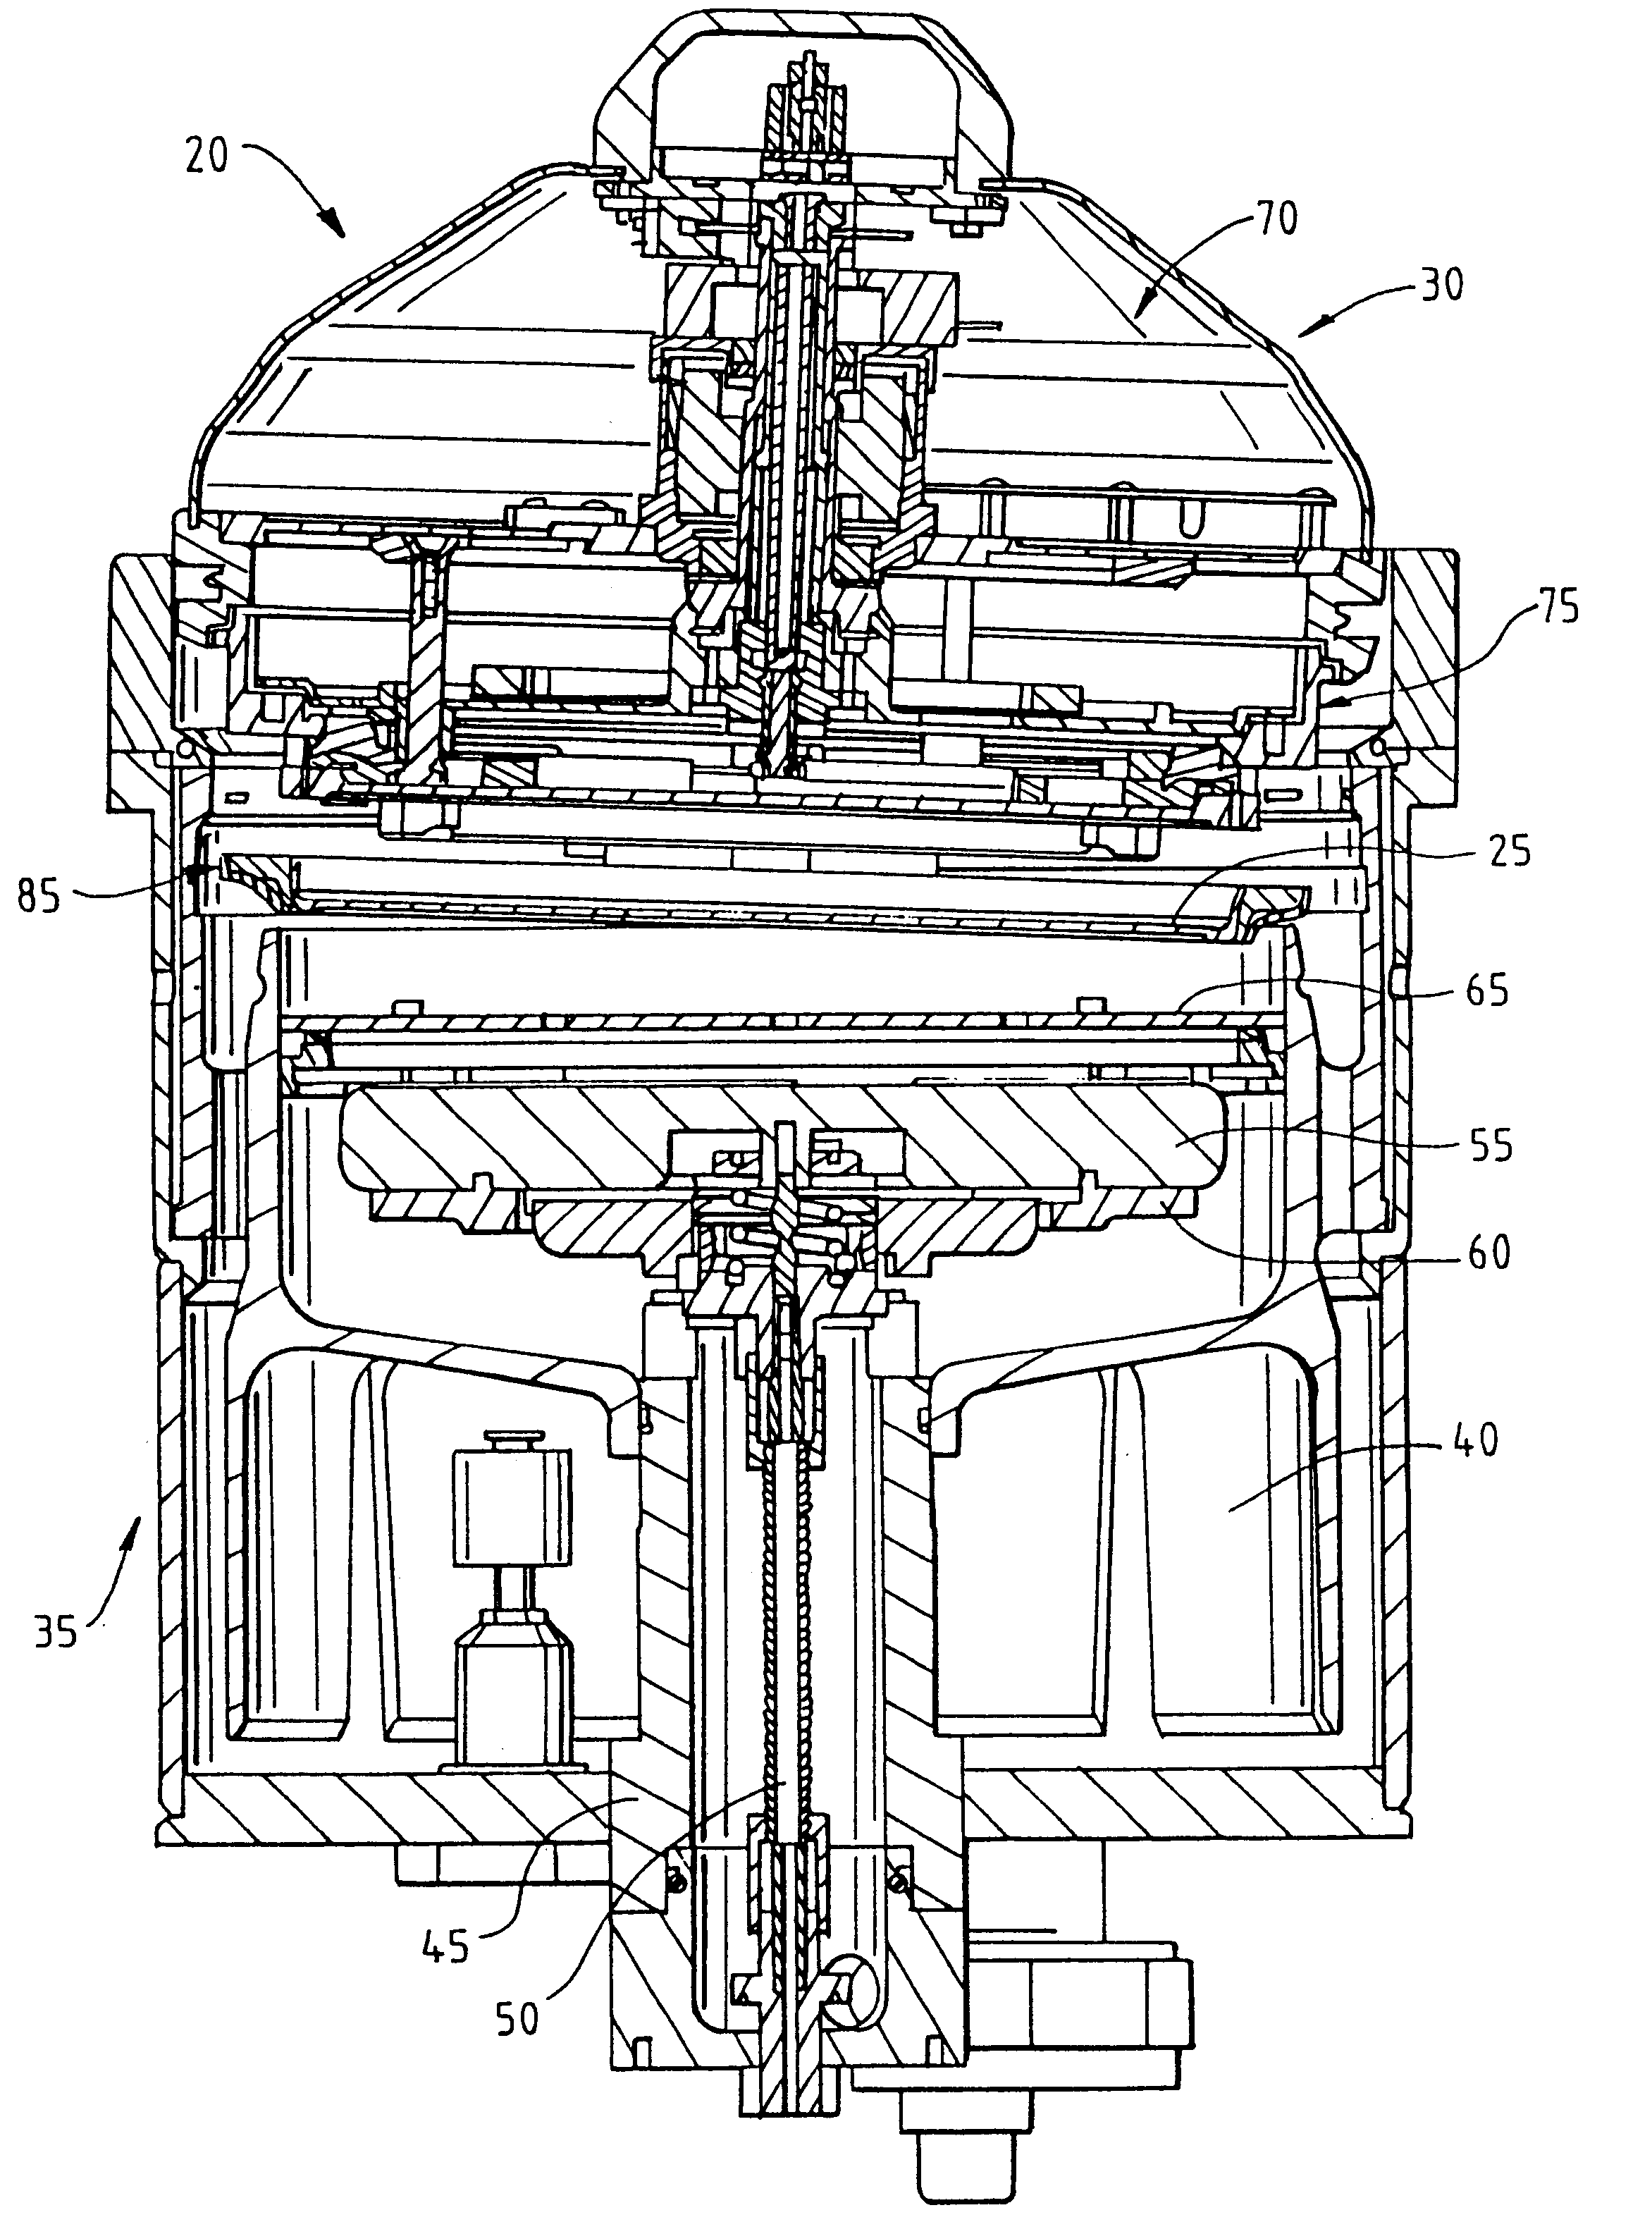 Apparatus for high deposition rate solder electroplating on a microelectronic workpiece